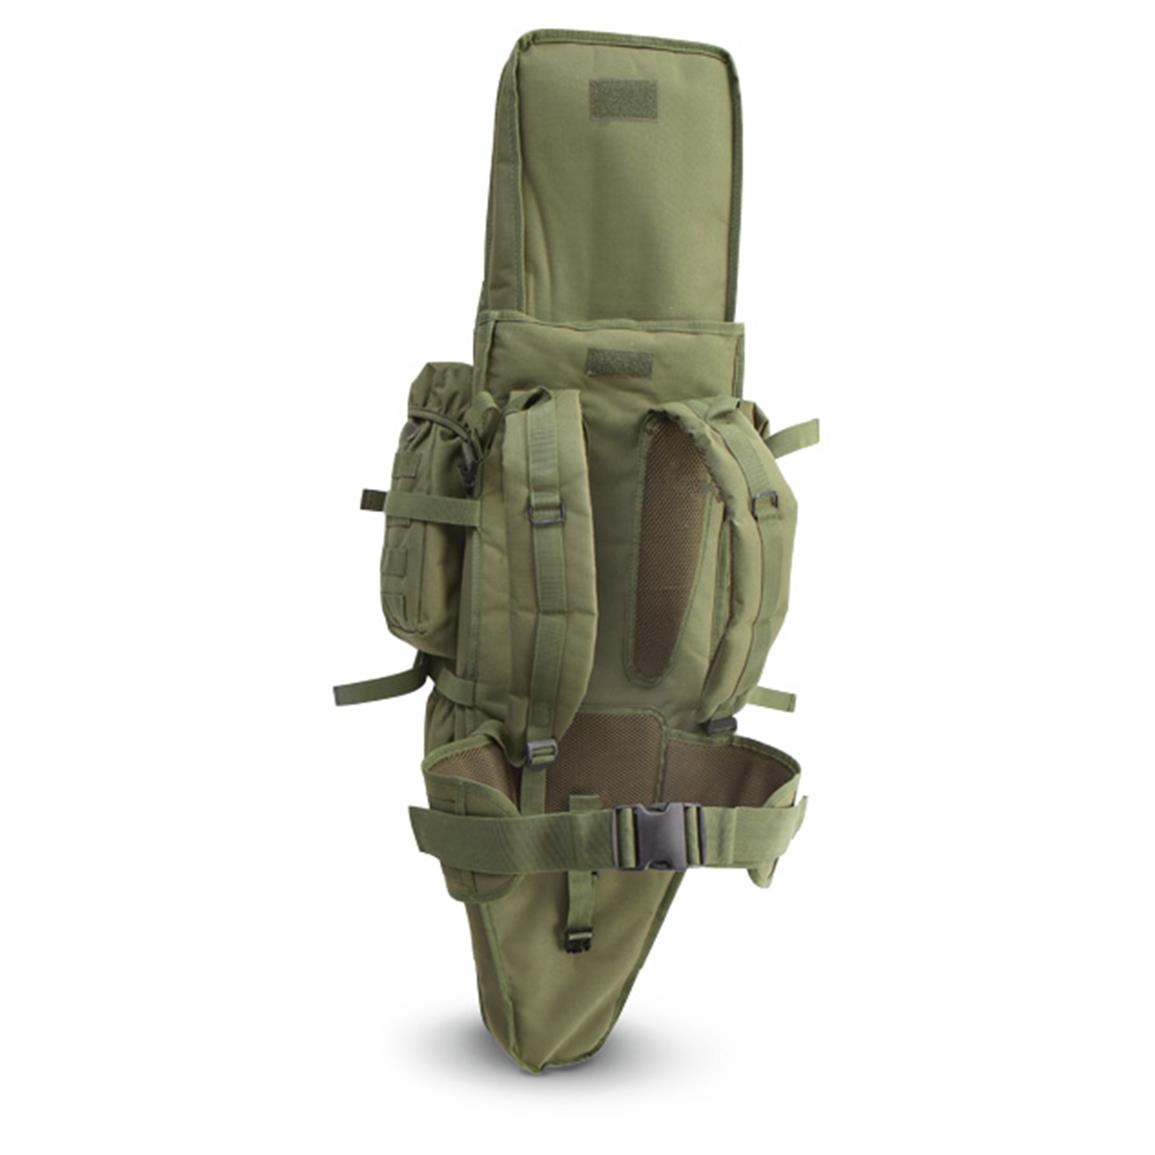 Cactus Jack Tactical Assault Bag with Rifle Holder - 614673, Military ...